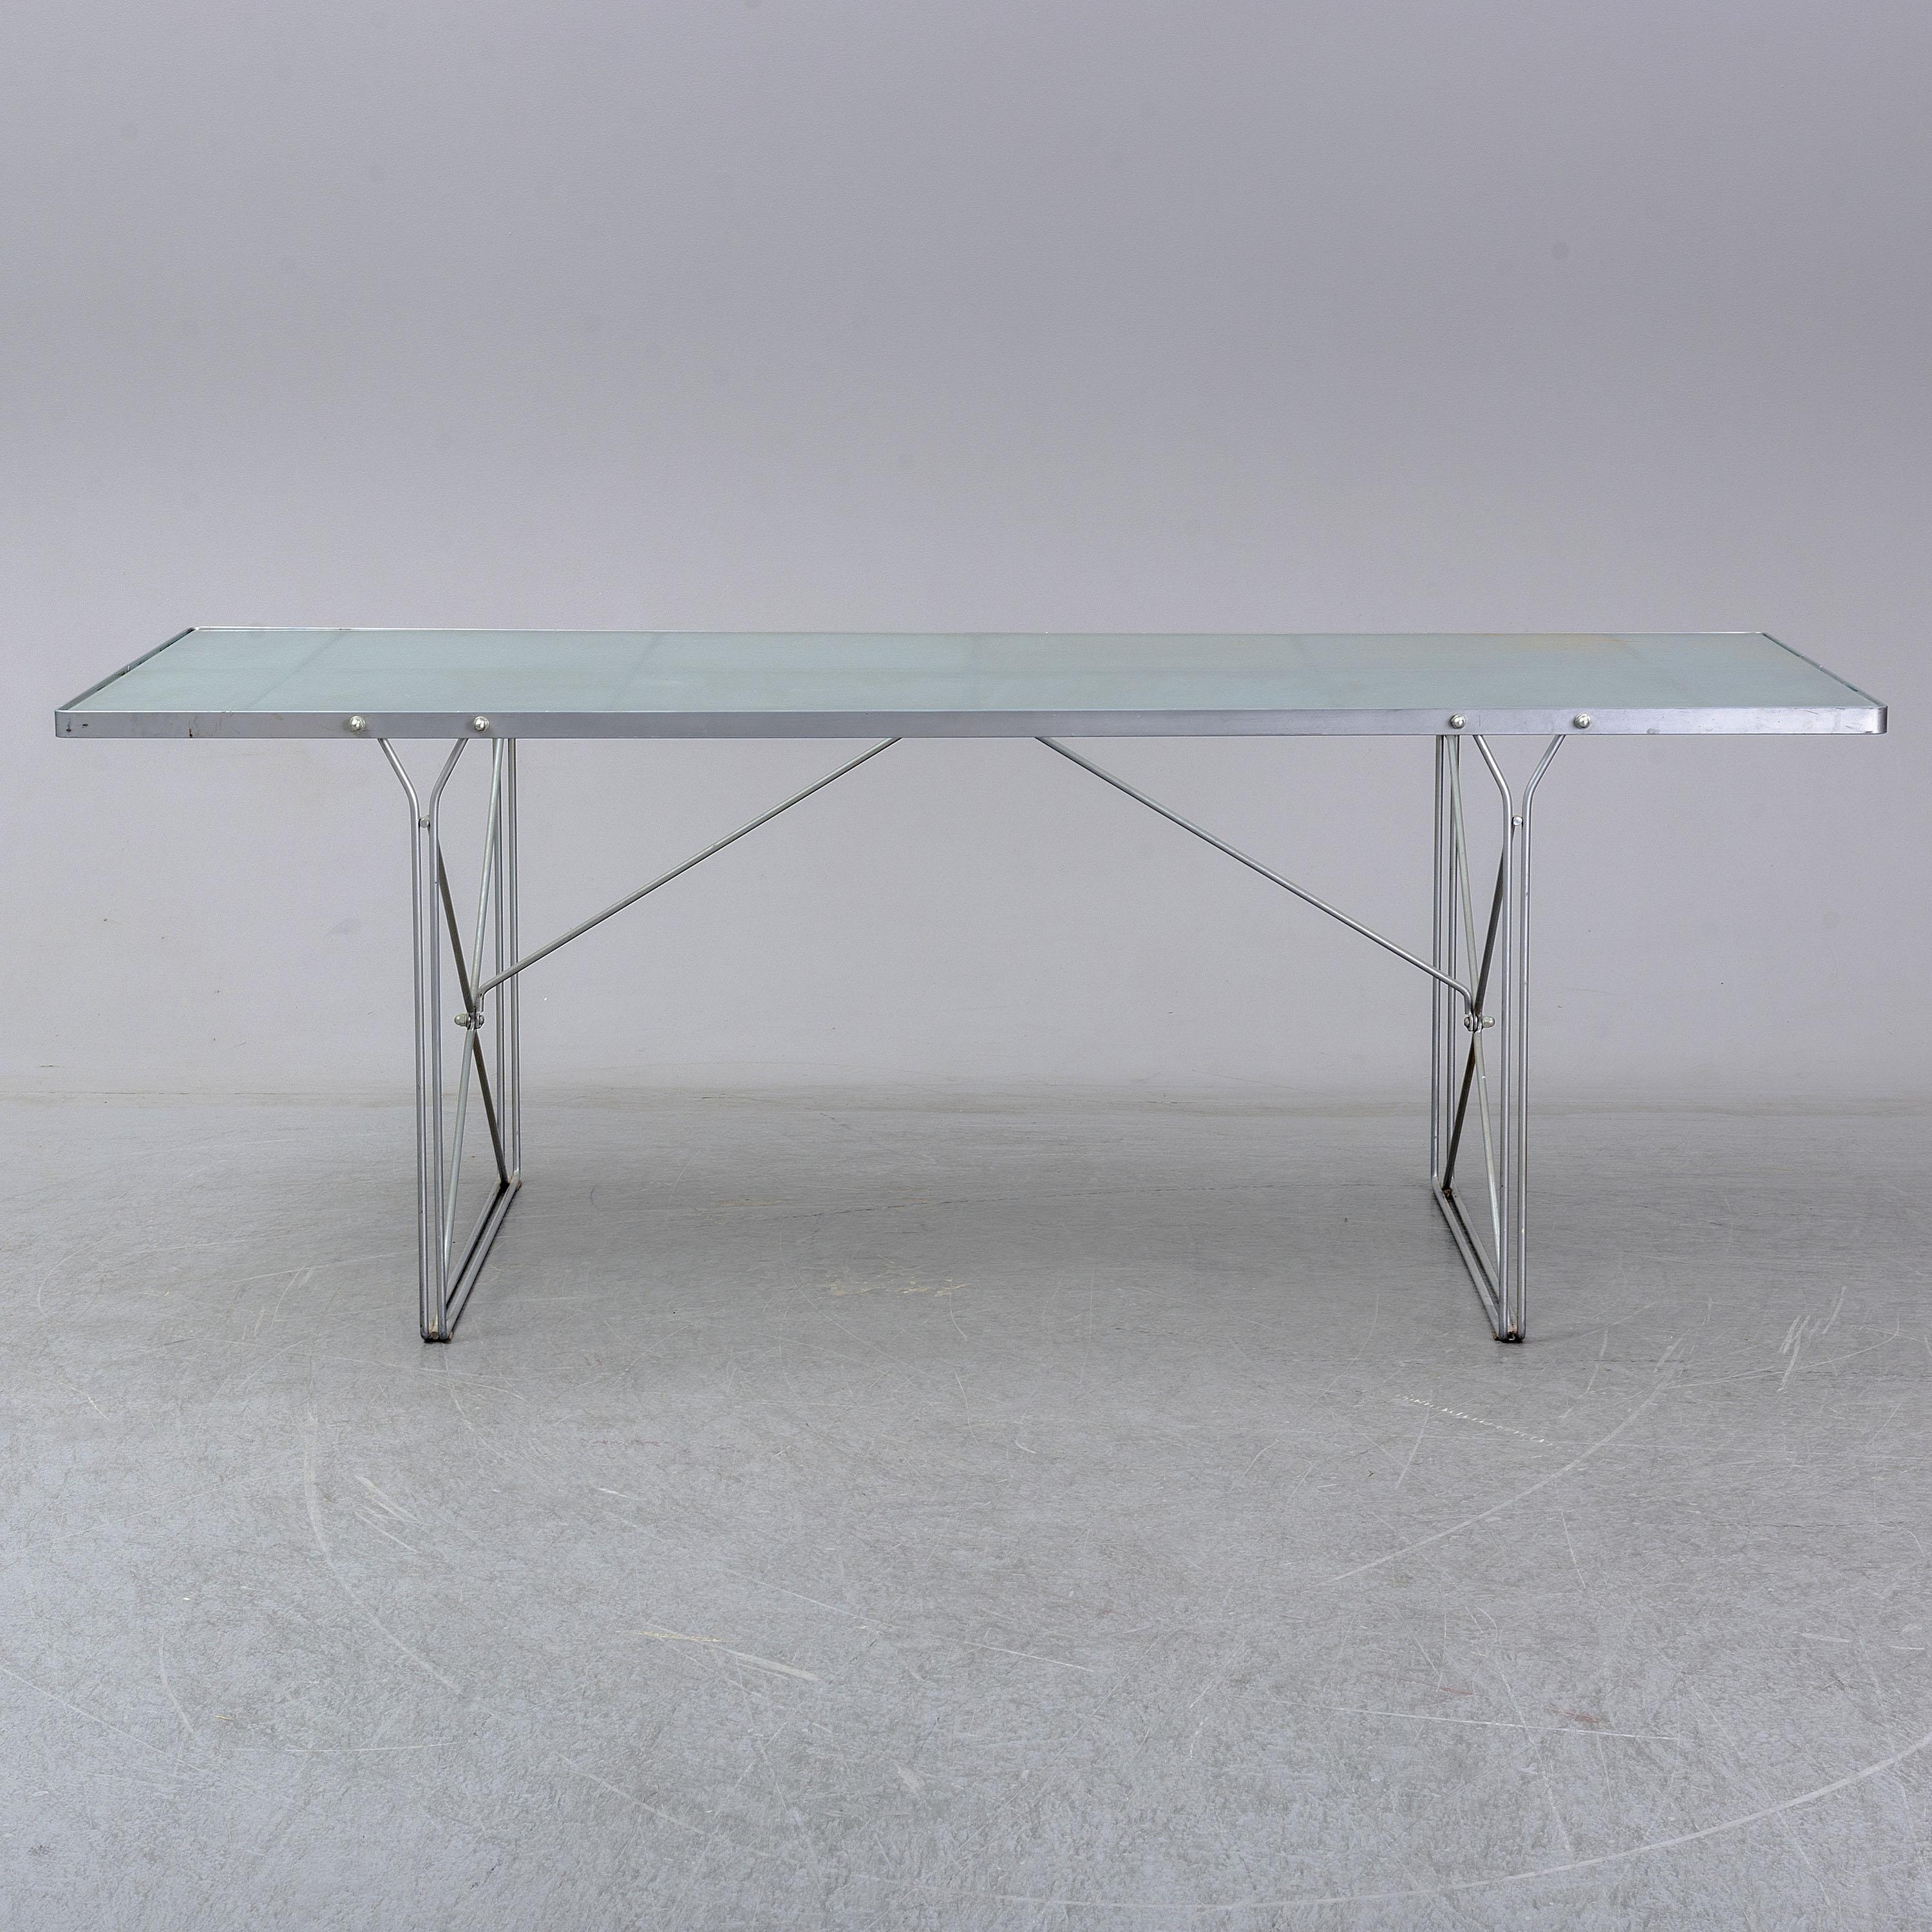 Vintage Ikea dining table from the iconic MOMENT collection by Niels Gammelgaard

Designed and manufactured in the 1980s


The table features a frosted glass top and powder-coated steel frame in matte grey color.

The table functions very